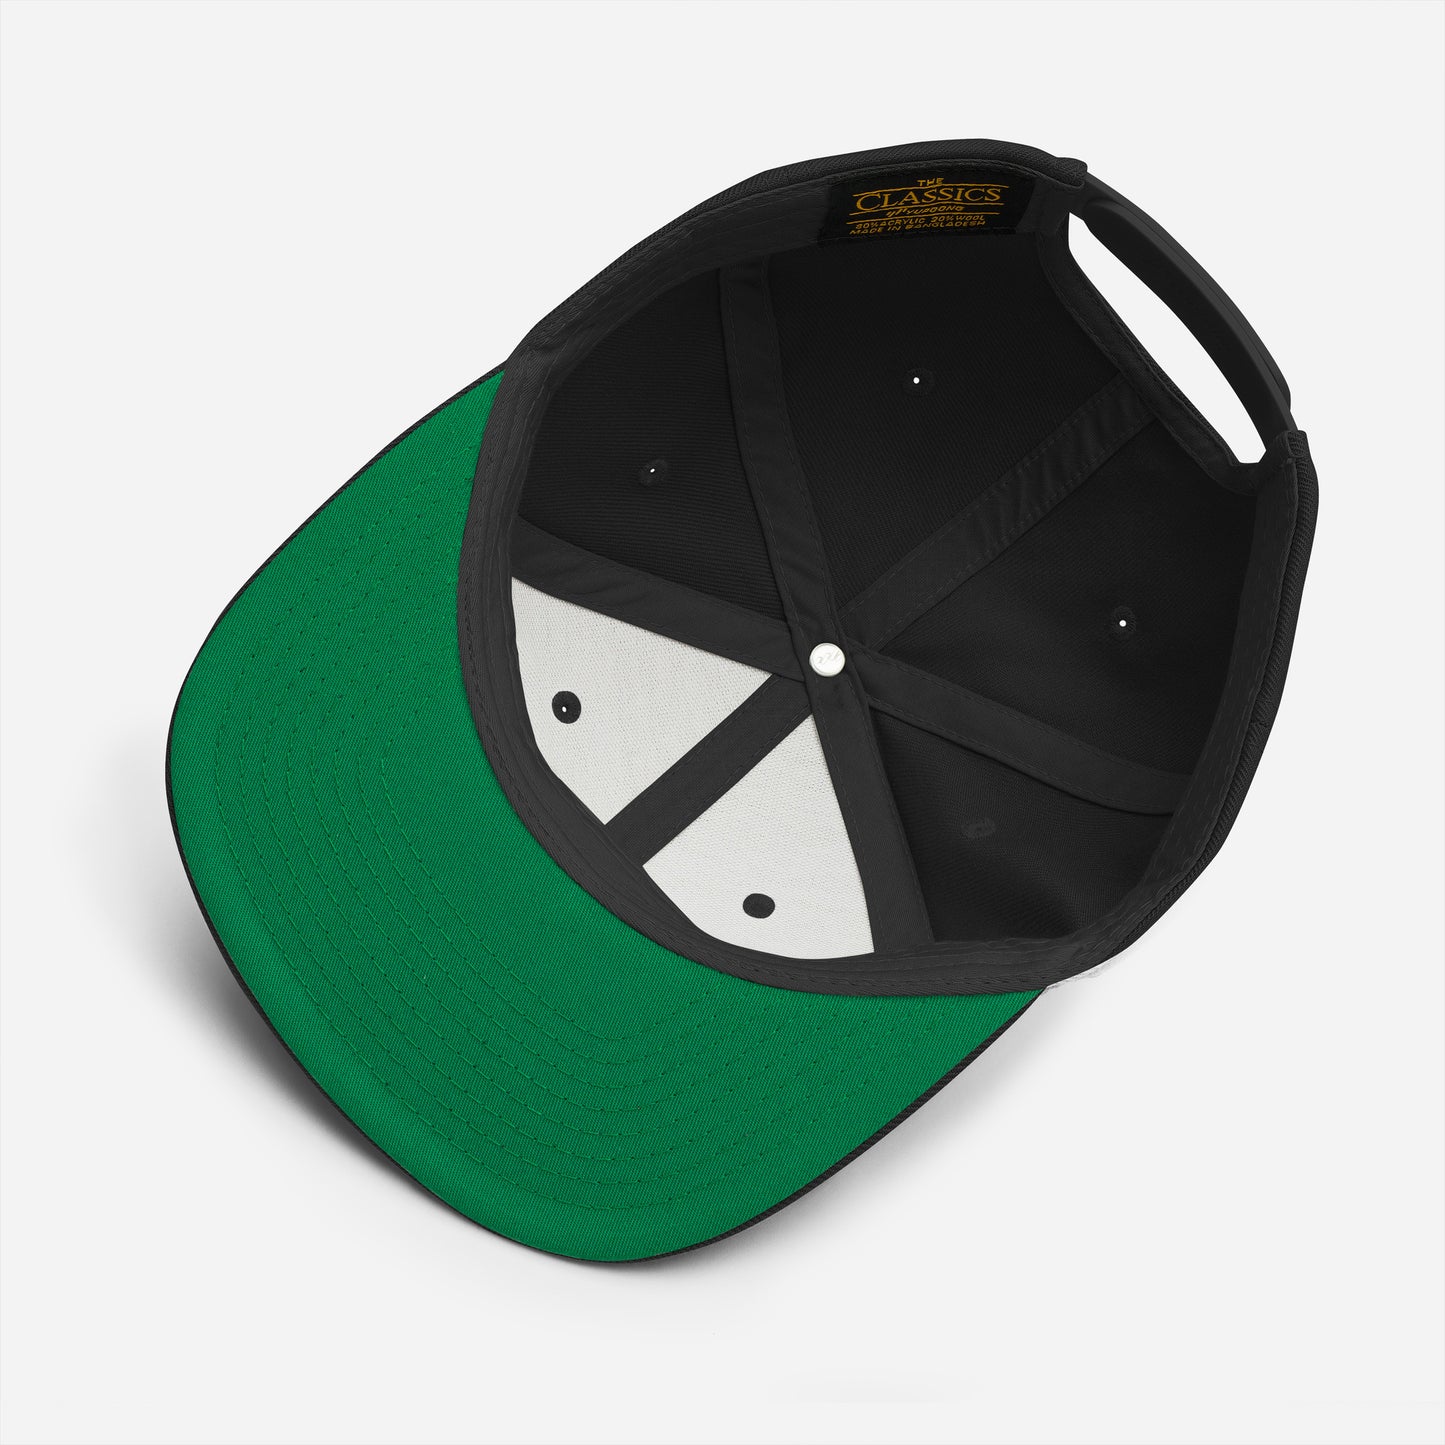 Interior view of a snapback hat showing the green underbill, adjustable plastic snap closure, and black crown, perfect for showcasing the "No Cerveza No Trabajo" meaning and style.